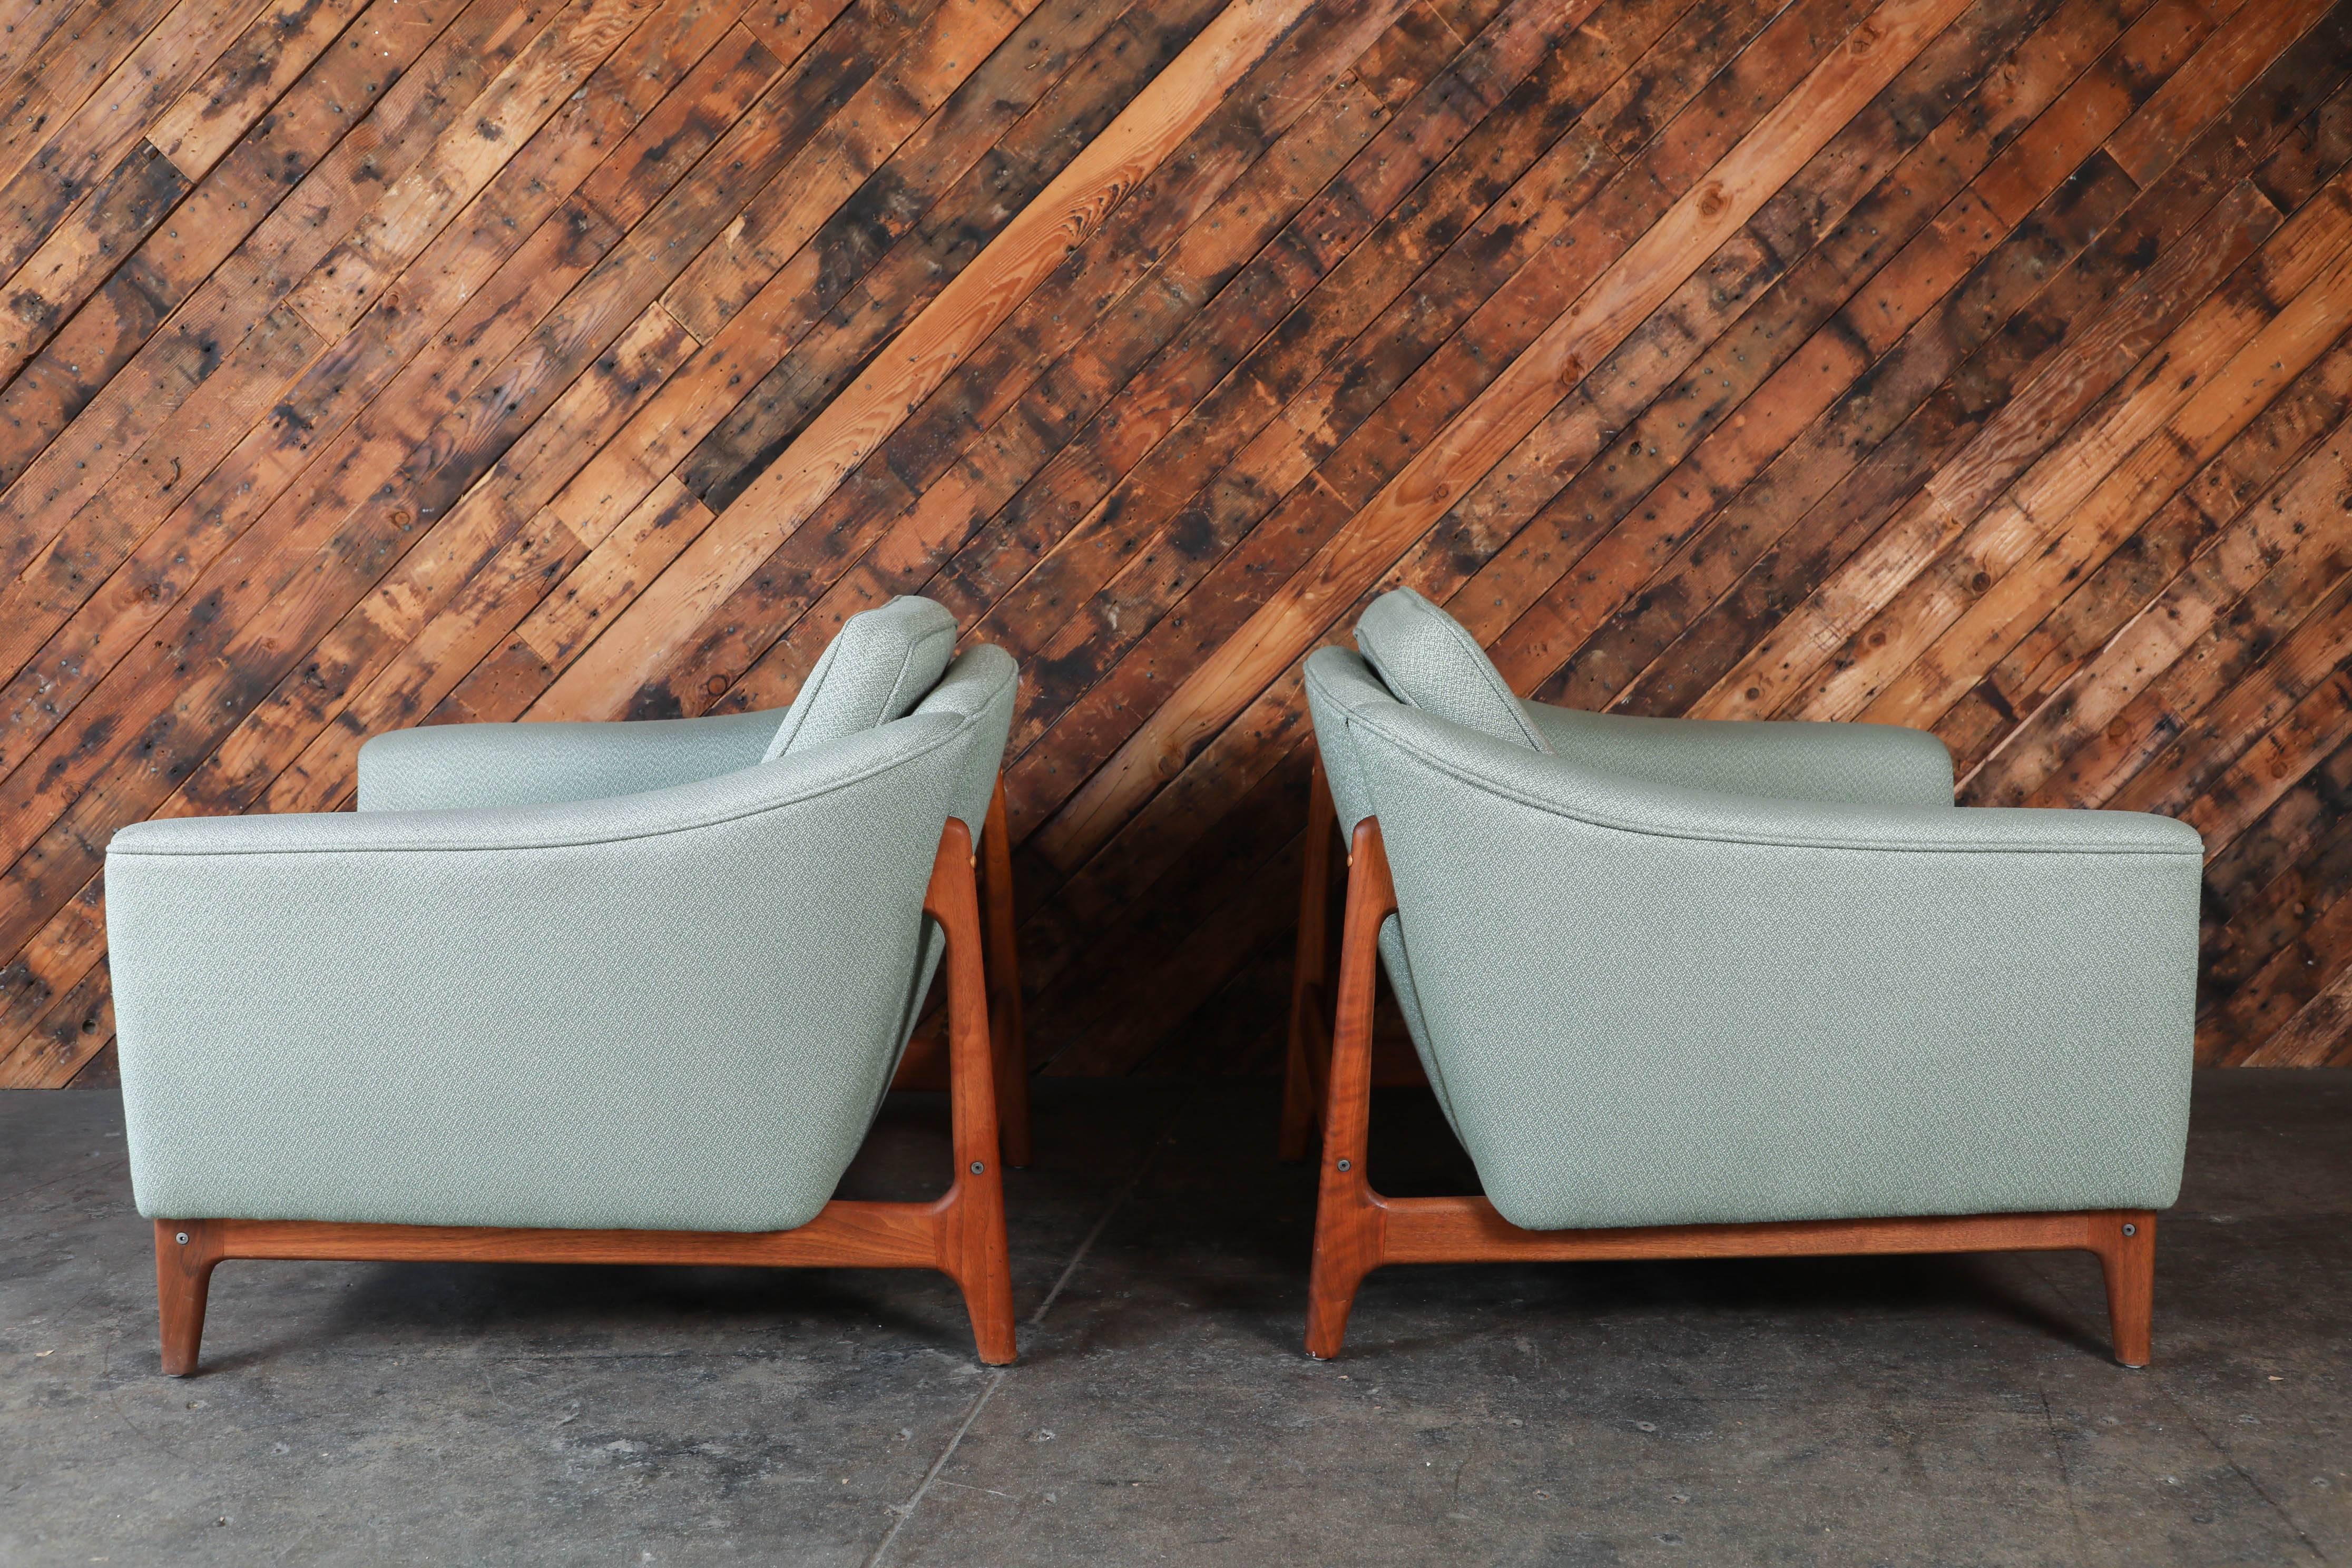 Green upholstery is clean vintage condition. Chairs are sold as a pair


 